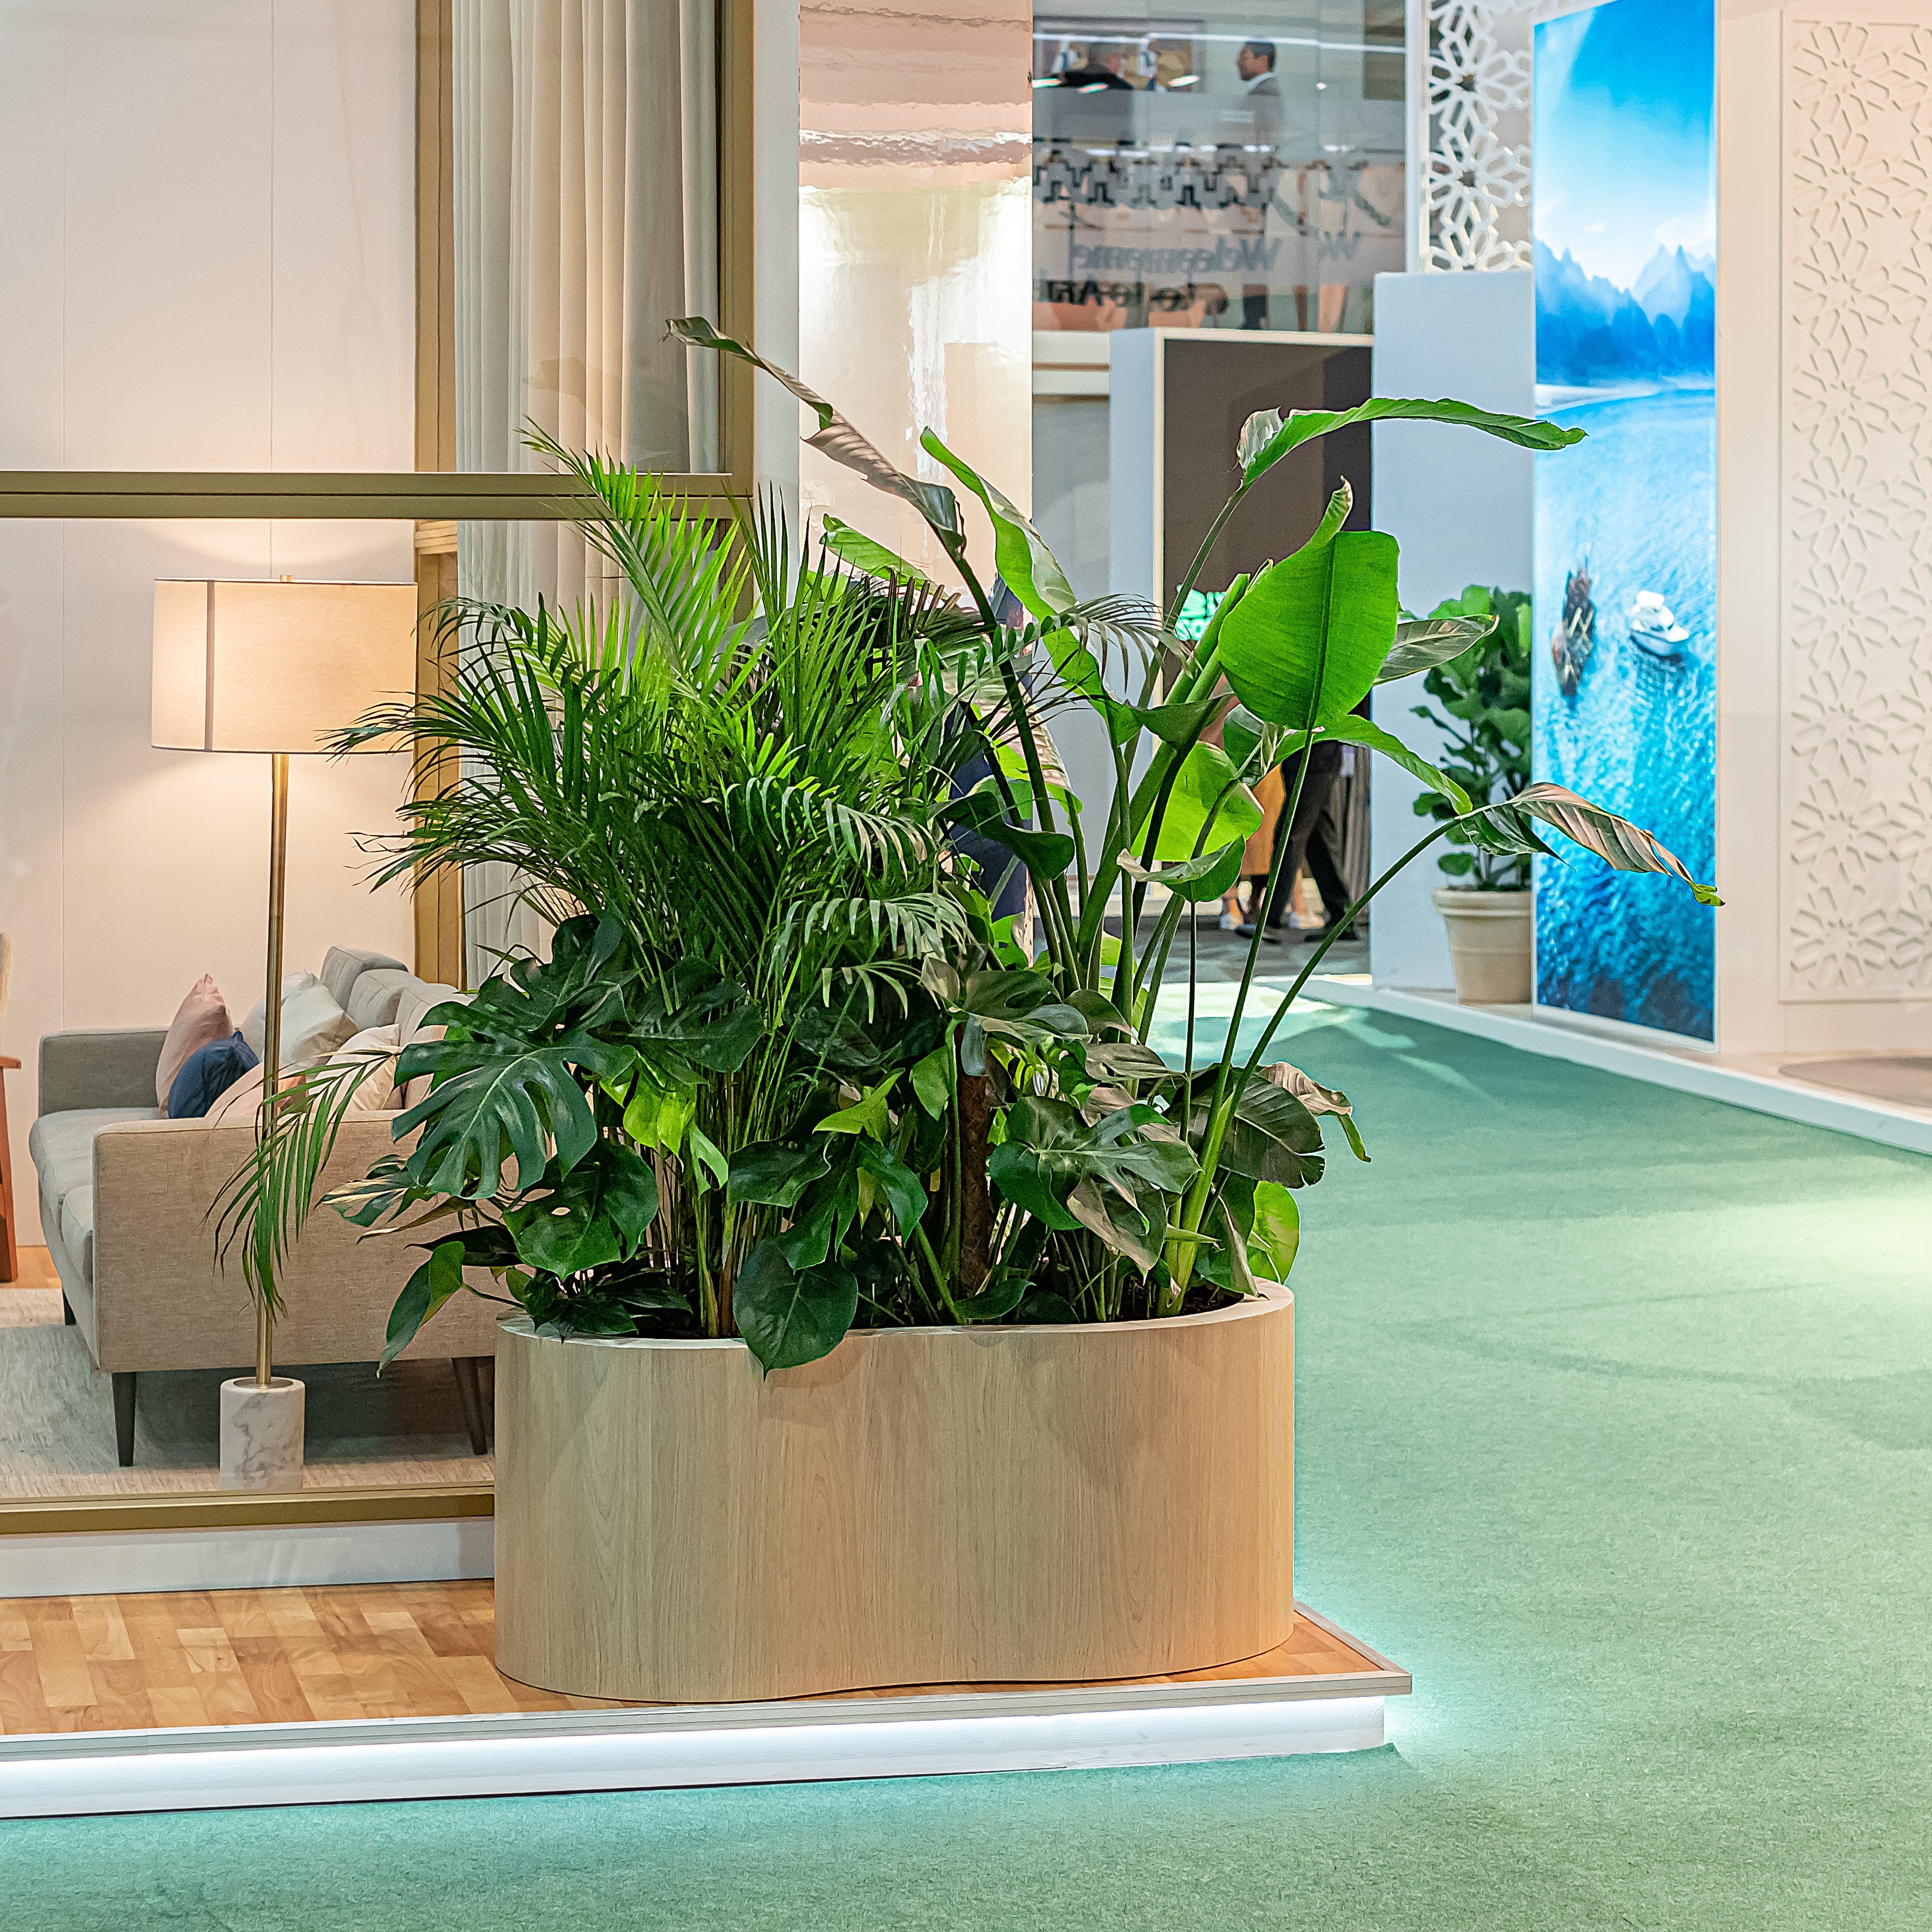 A single plant for hire presented as part of the plant installation for client Red Sea Global who wanted plants to create a natural décor style. 